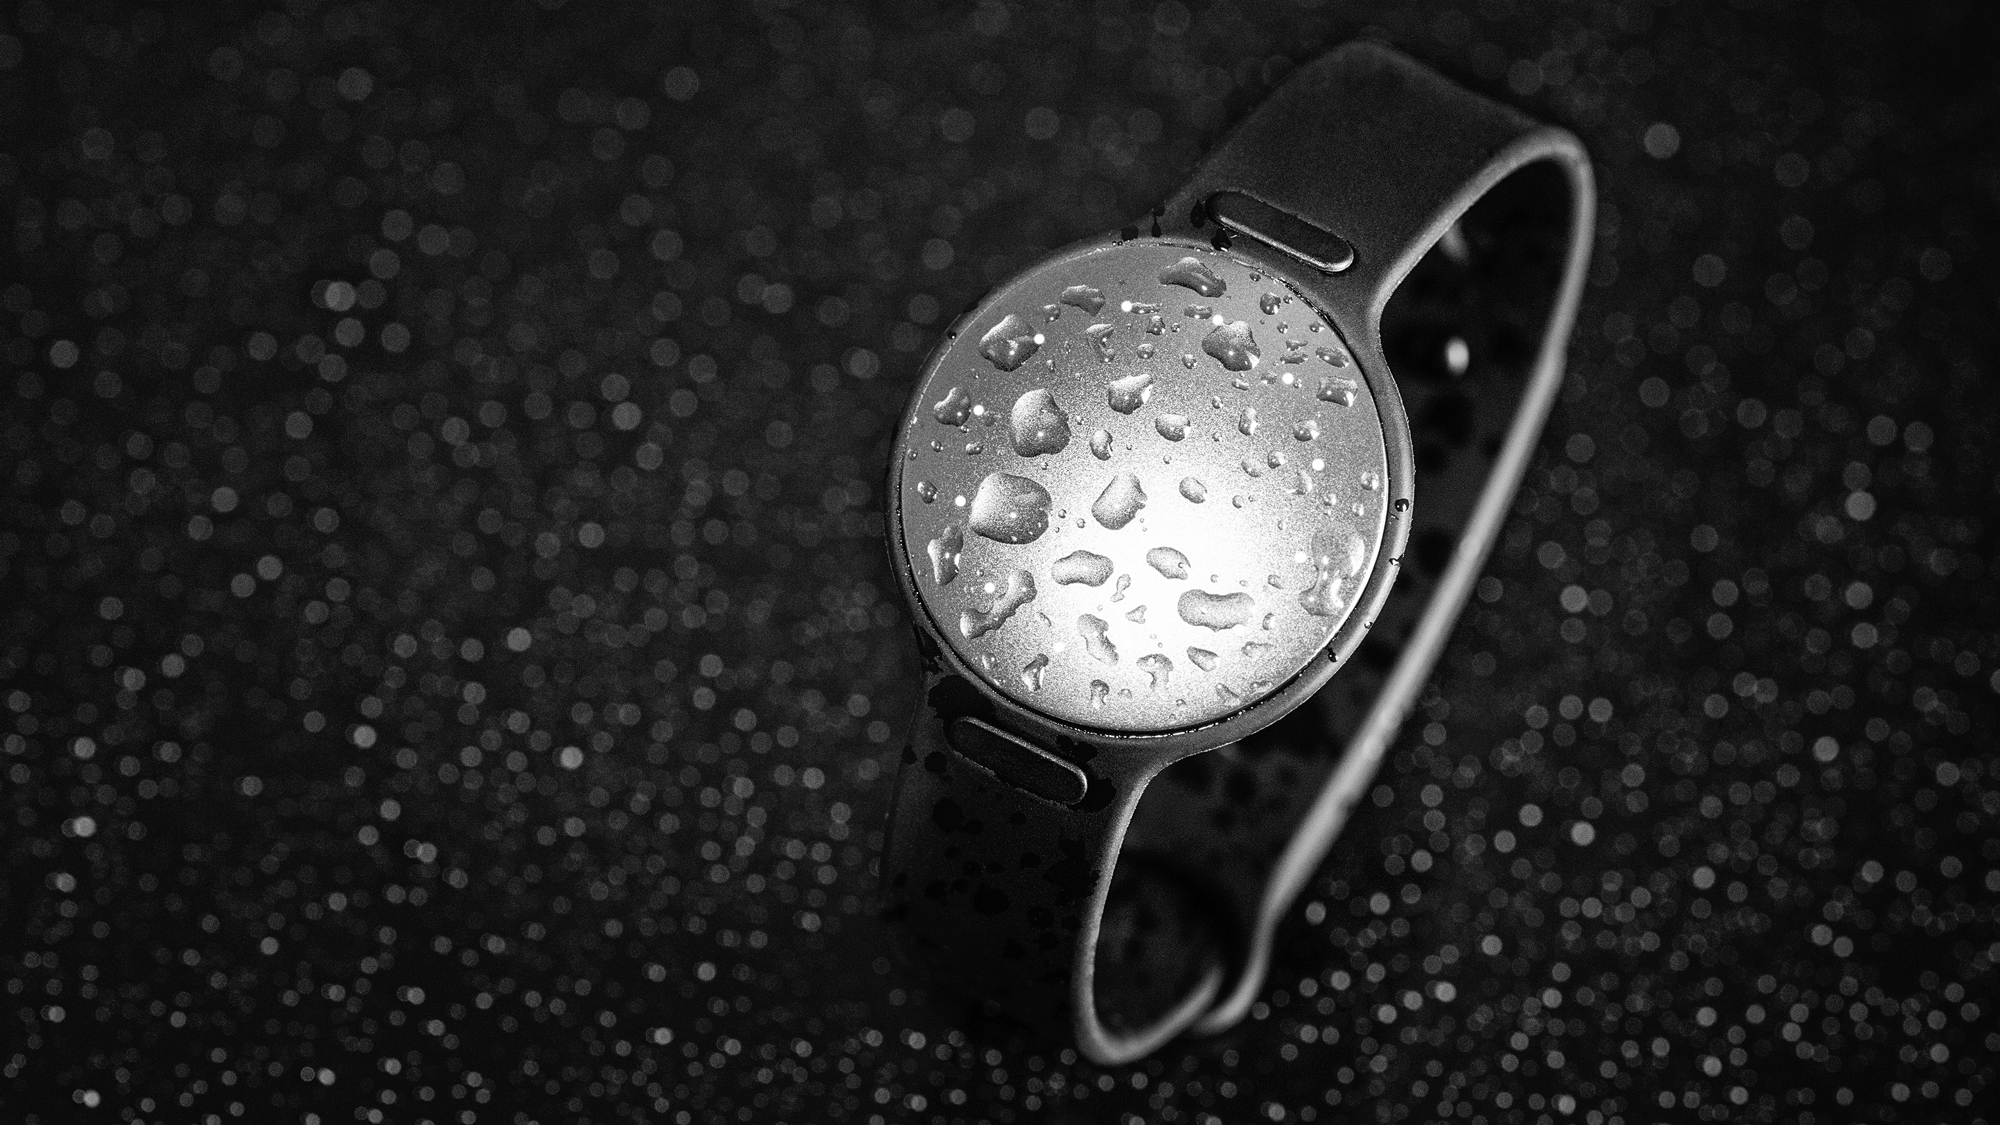 Misfit And Speedo’s Swim-Tracker Gains Some Useful Smartwatch Functionality